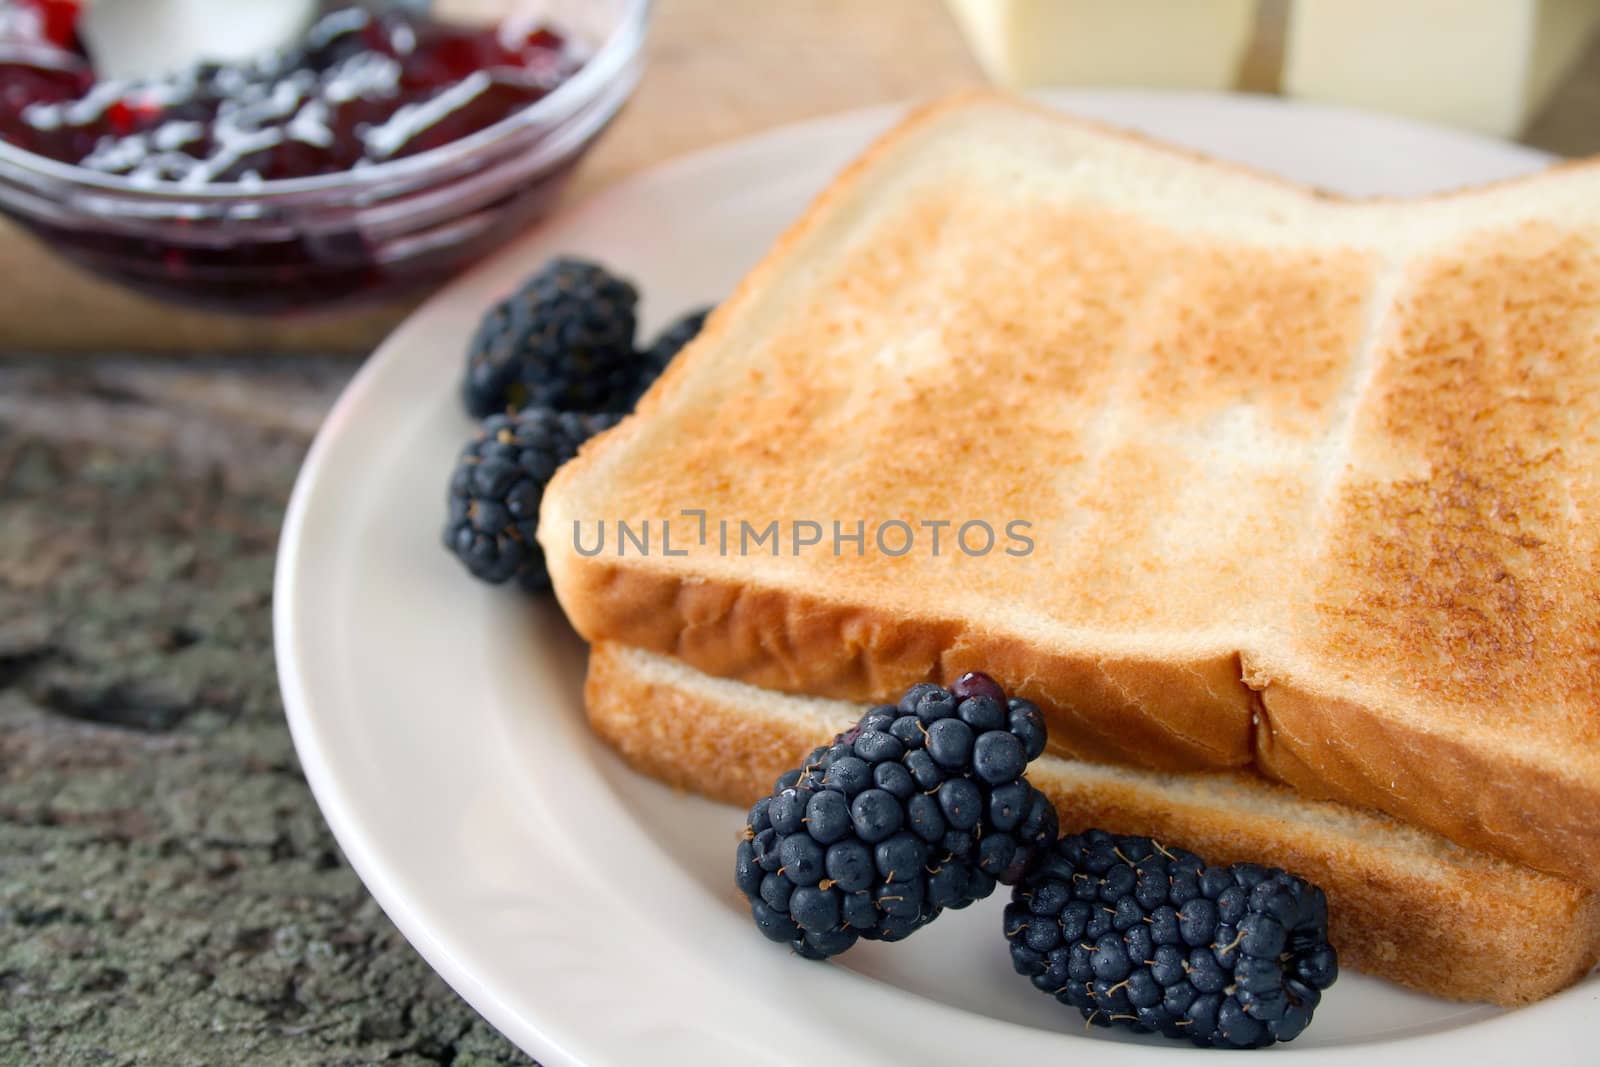 Fresh blackberries and blackberry jam with toast and butter. Used a shallow DOF on the berries and edge of toast.